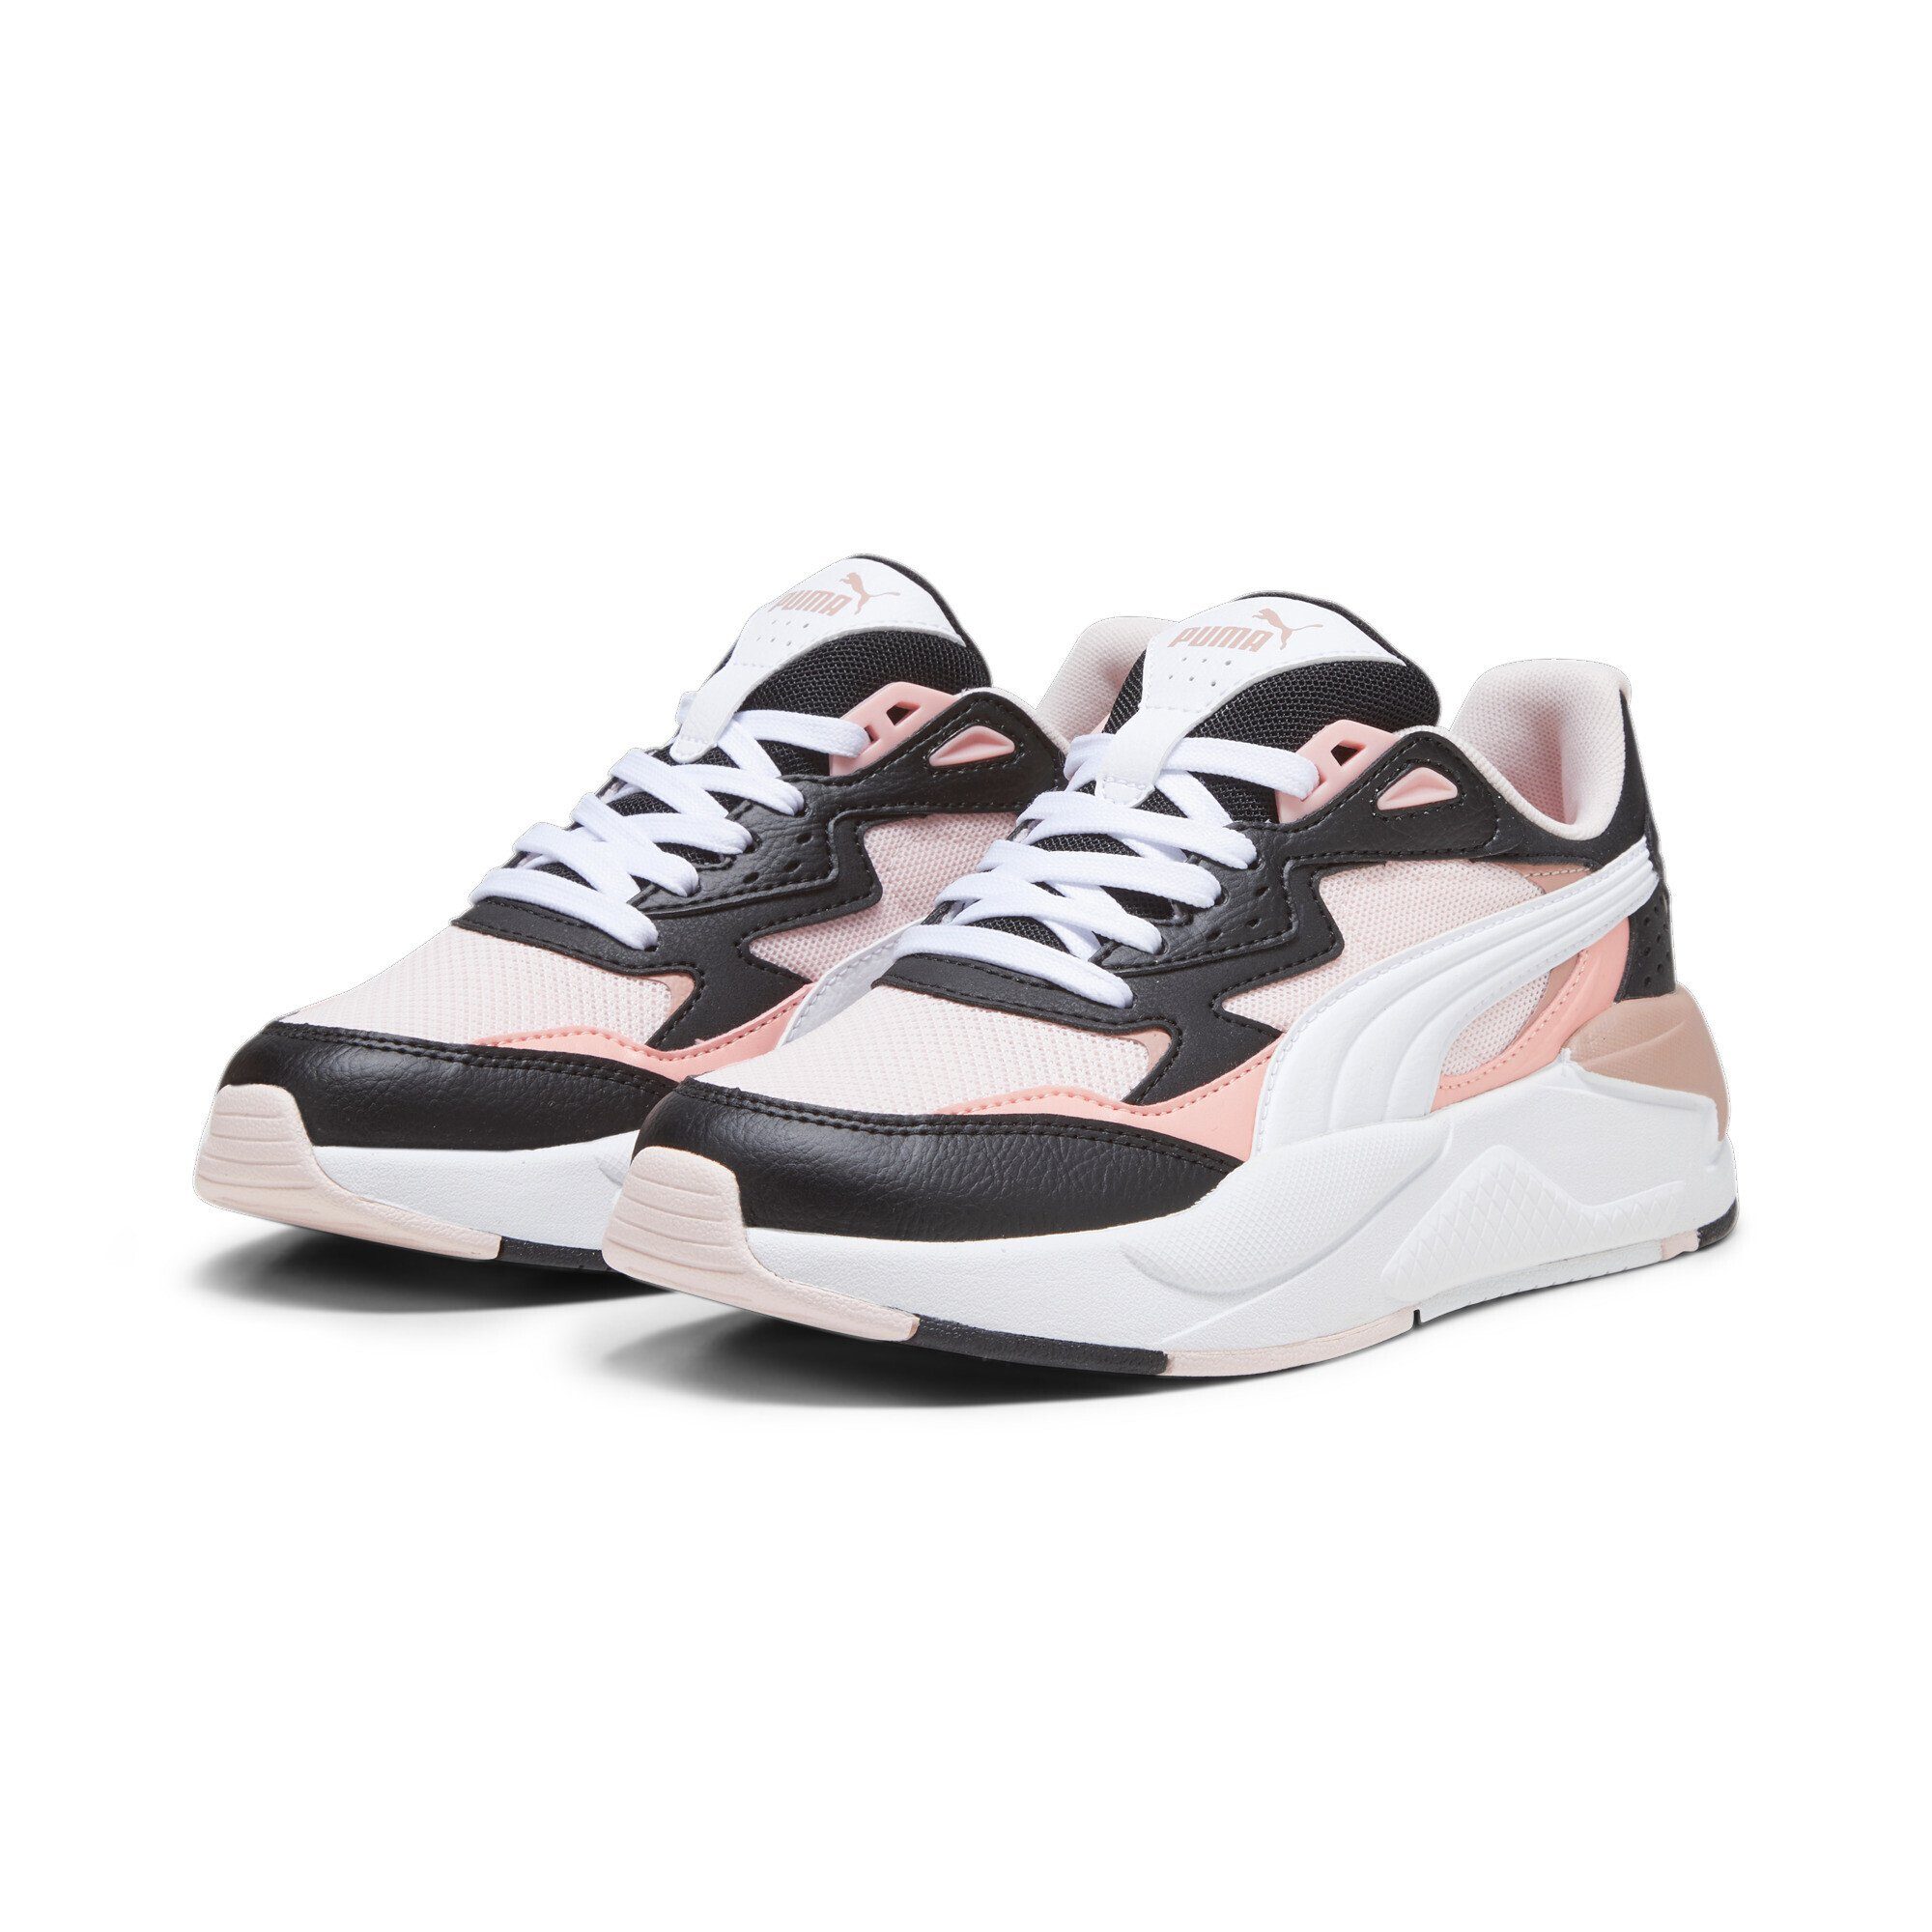 Jugendliche Sneakers Peach Black White X-Ray Pink PUMA Smoothie Speed Sneaker Frosty